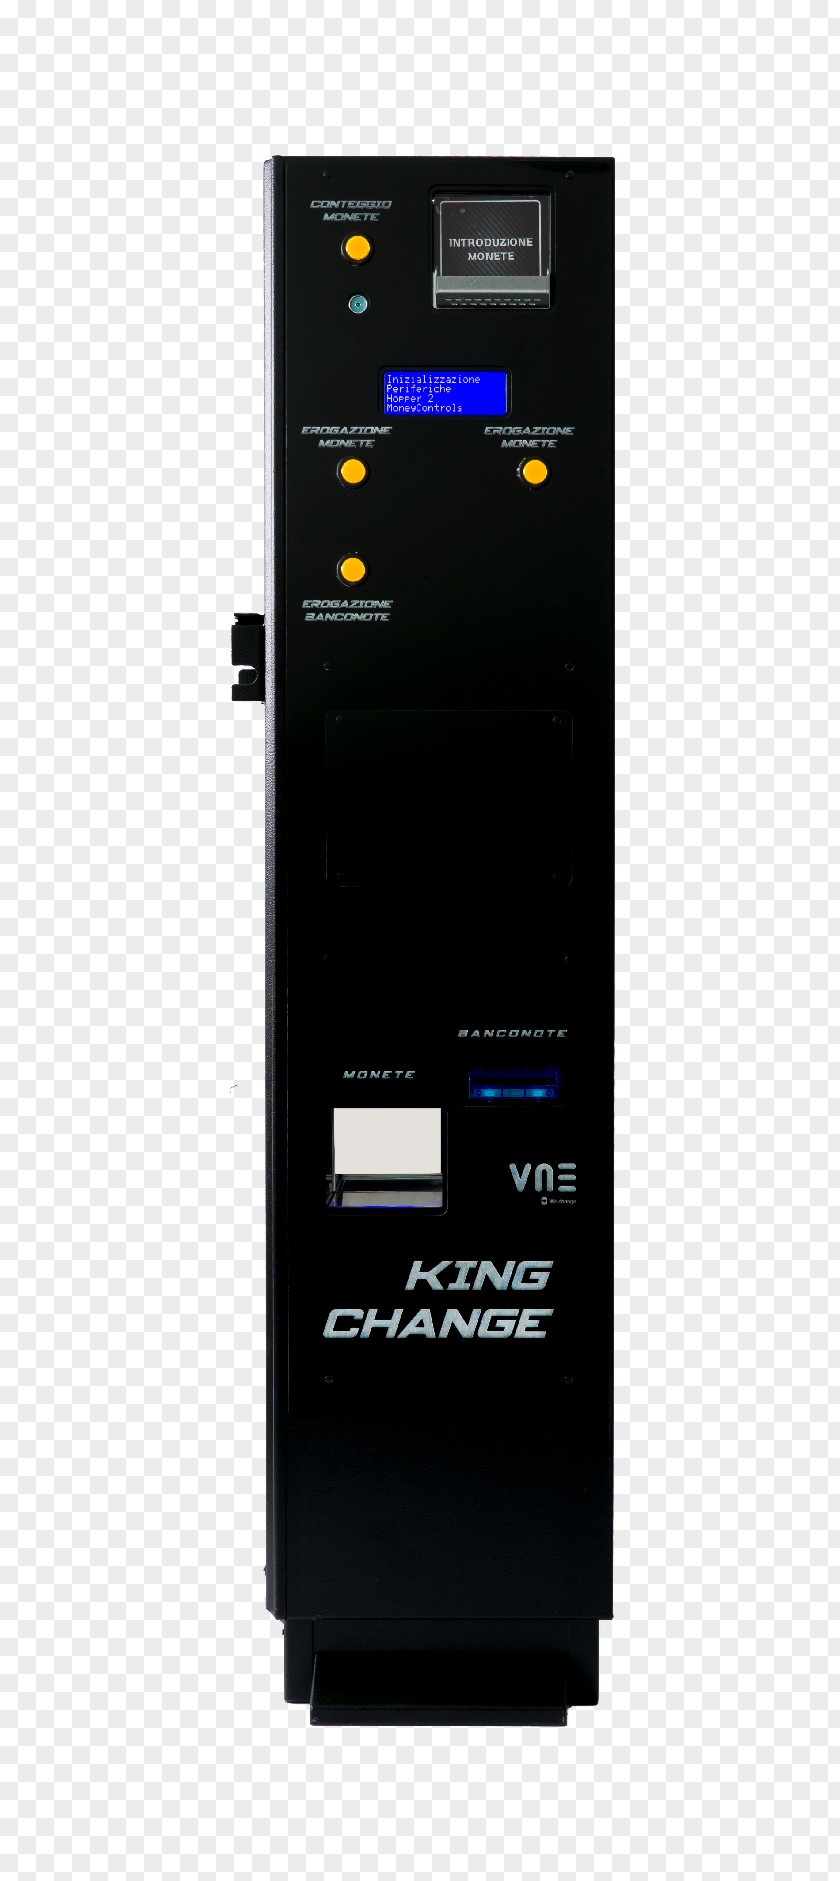 Coin Banknote Change Machine Product Money PNG